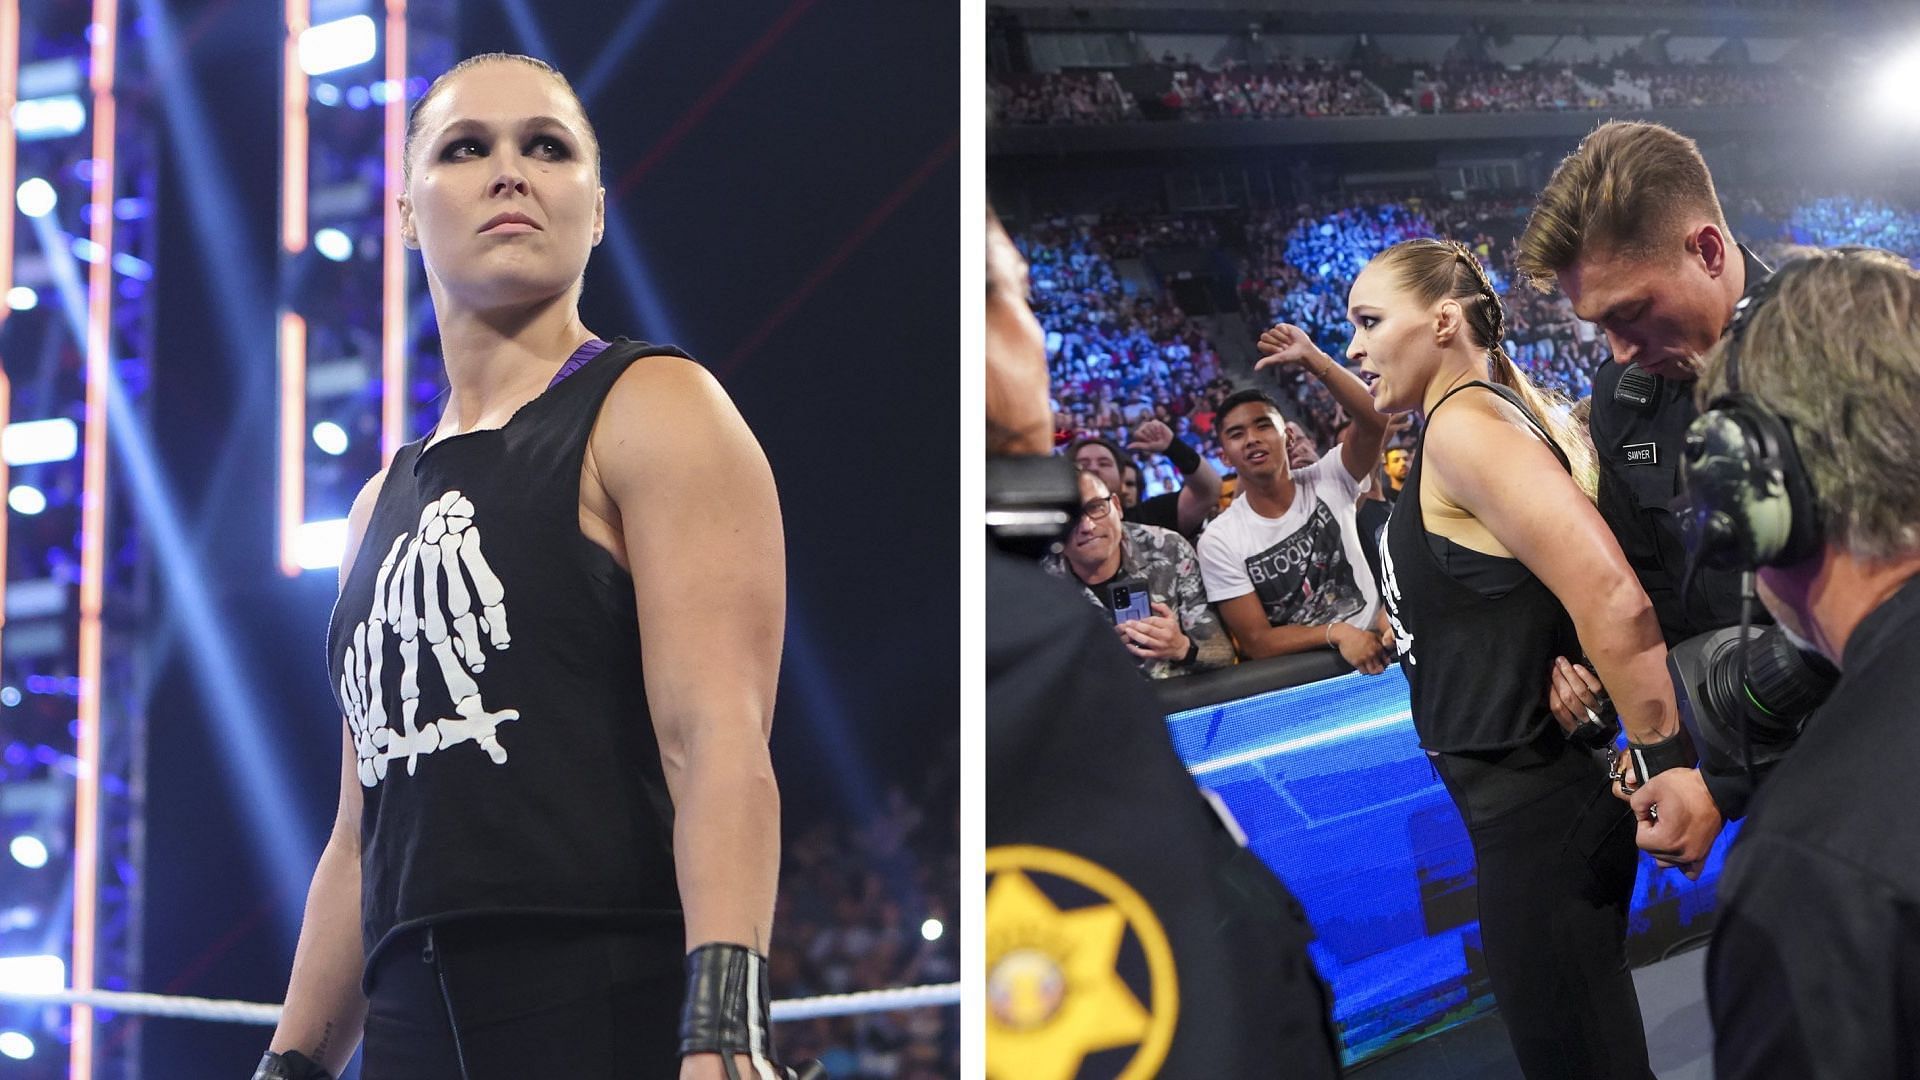 Ronda Rousey could potentially appear at WWE Clash at the Castle